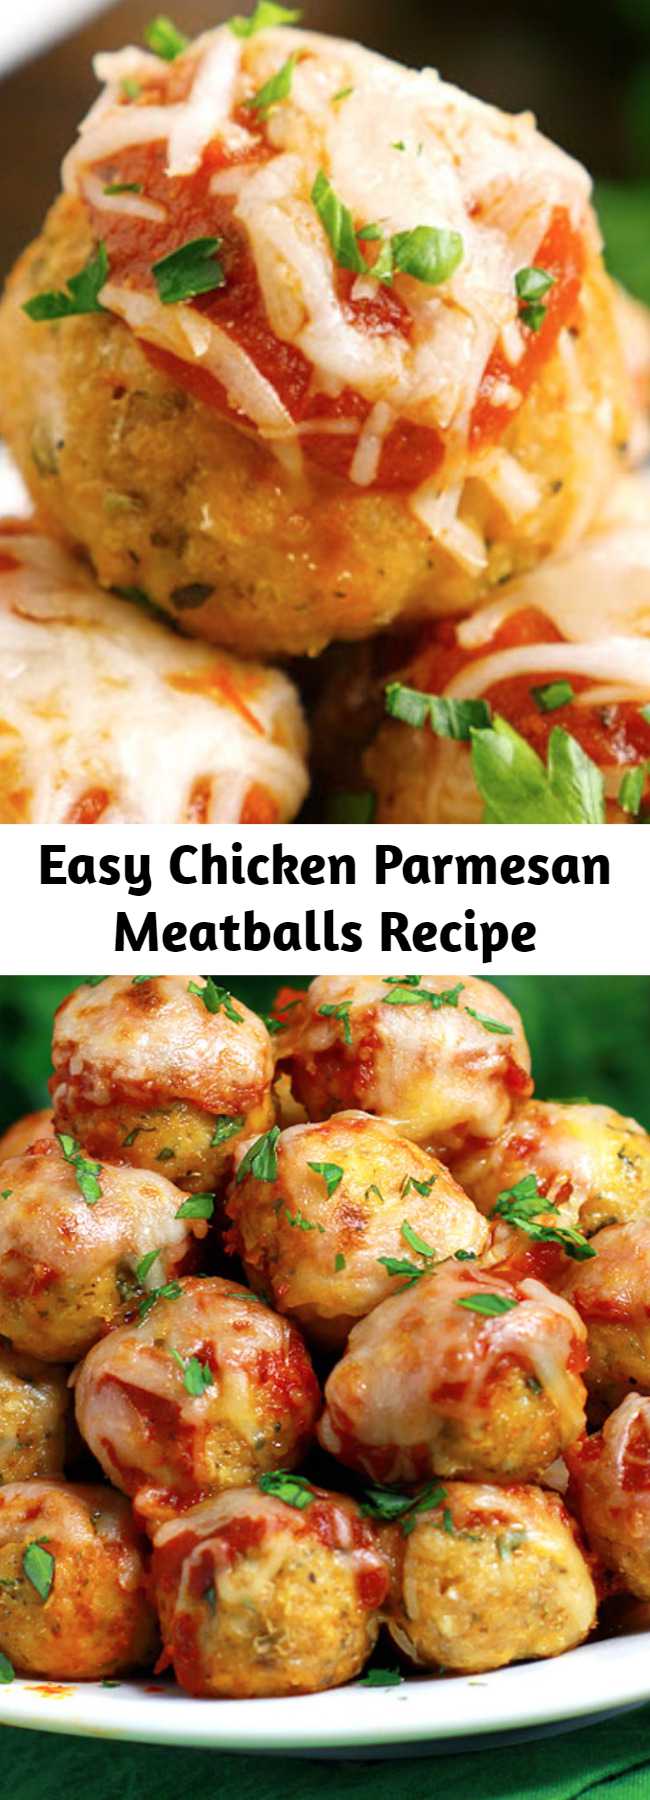 Easy Chicken Parmesan Meatballs Recipe - Chicken Parmesan Meatballs are your favorite chicken Parmesan transformed into these tender and flavorful, saucy baked chicken meatballs.Topped with the perfect blend of ooey gooey cheese. You're going to love 'em! #ChickenParmesan #Meatballs